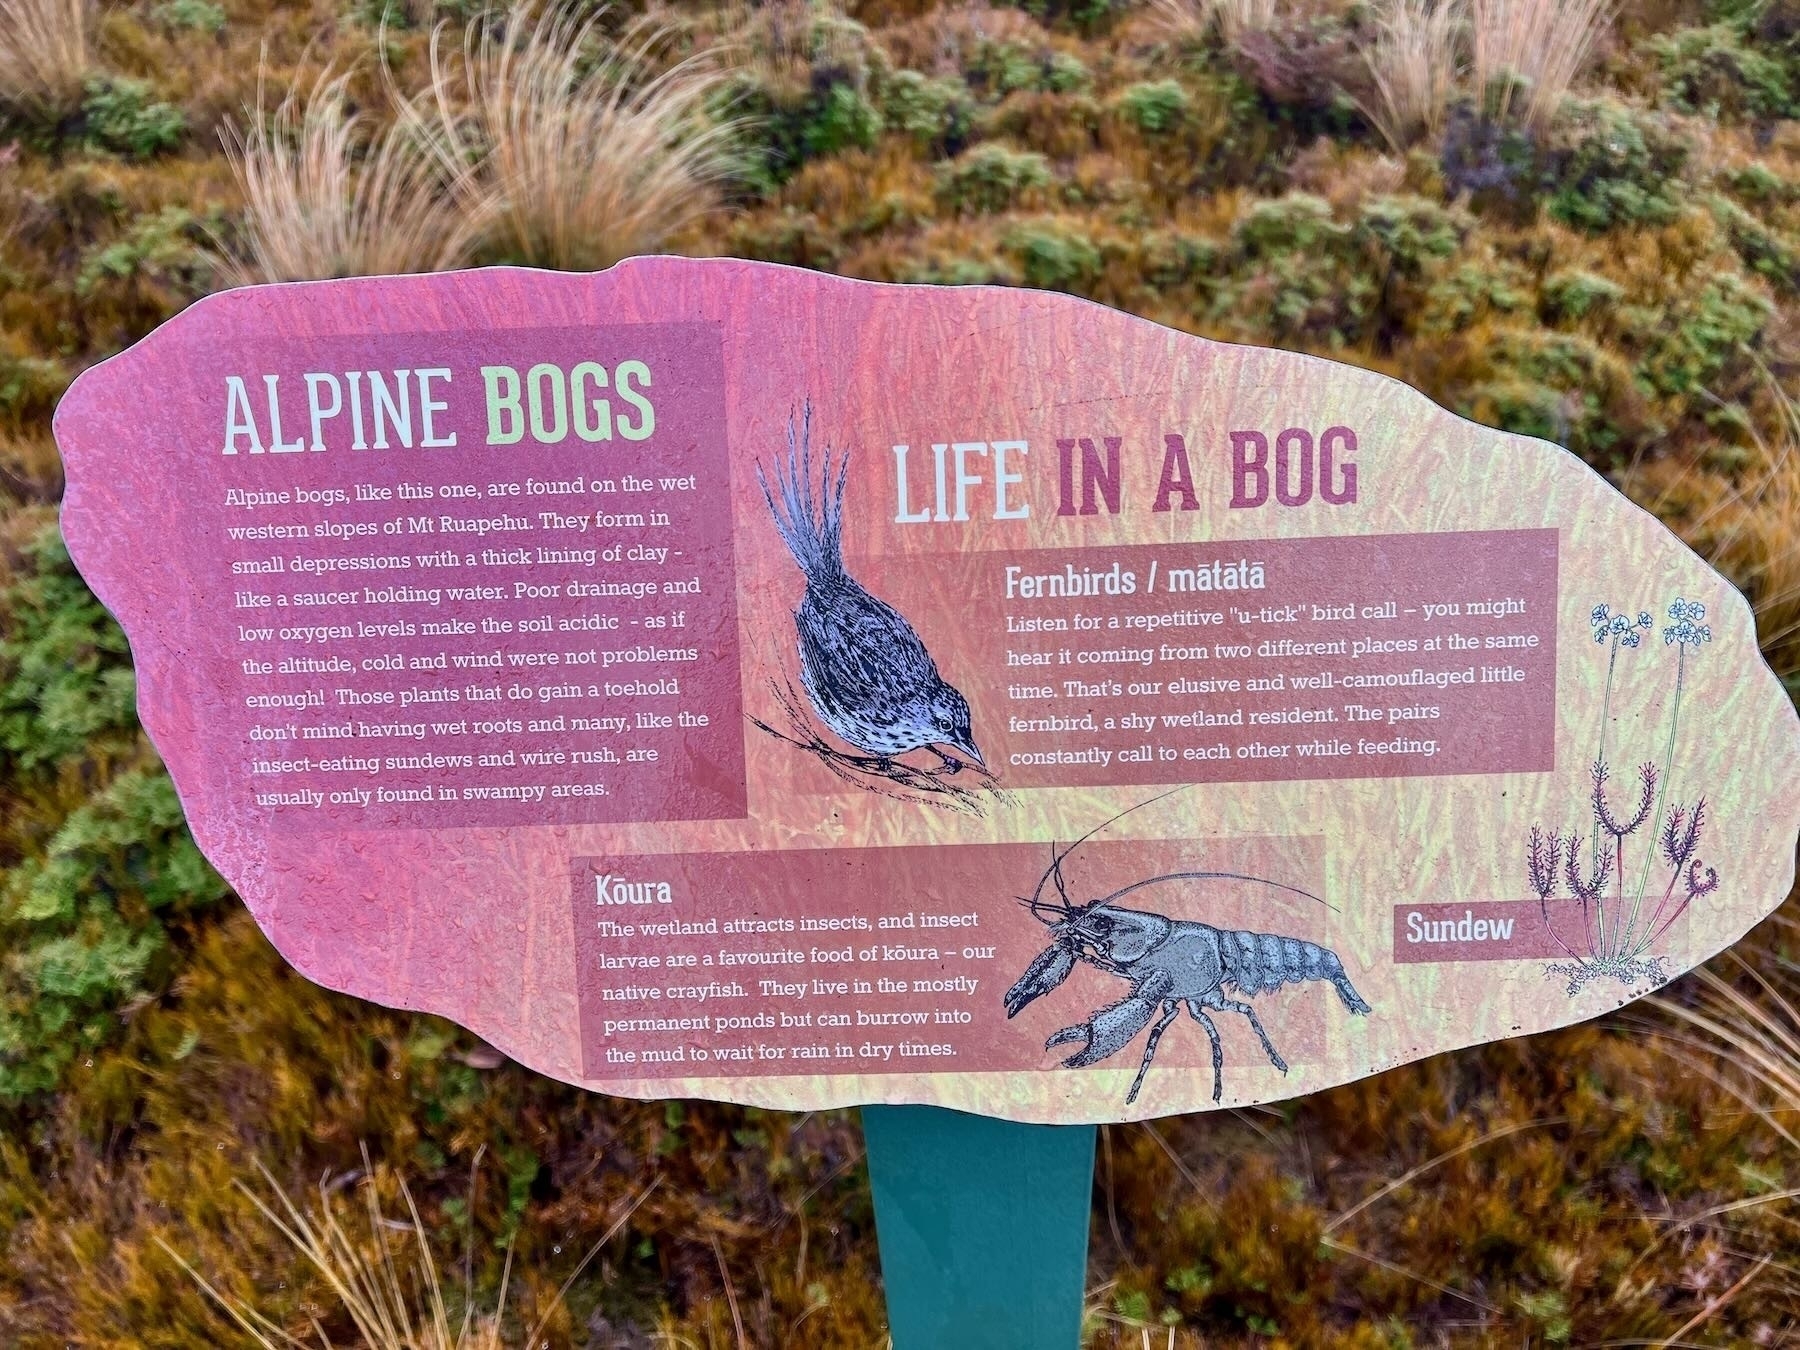 Sign explaining that alpine bogs form in small depressions with a thick lining of clay like a saucer holding water. 